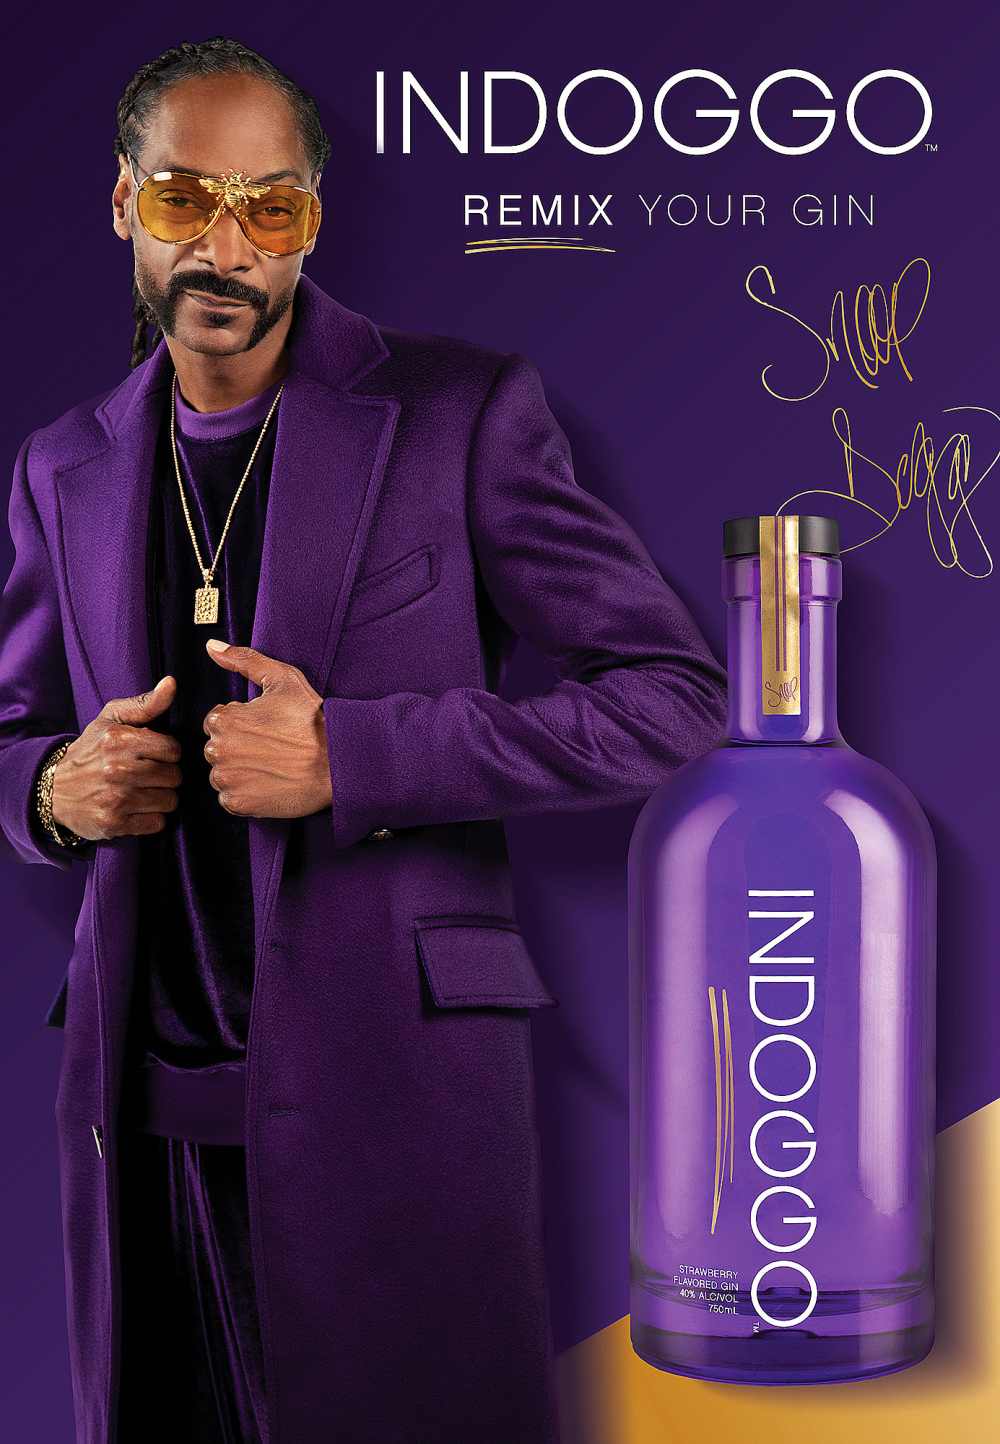 Snoop Dogg Releases His Own Gin 25 Years After Gin and Juice Debut